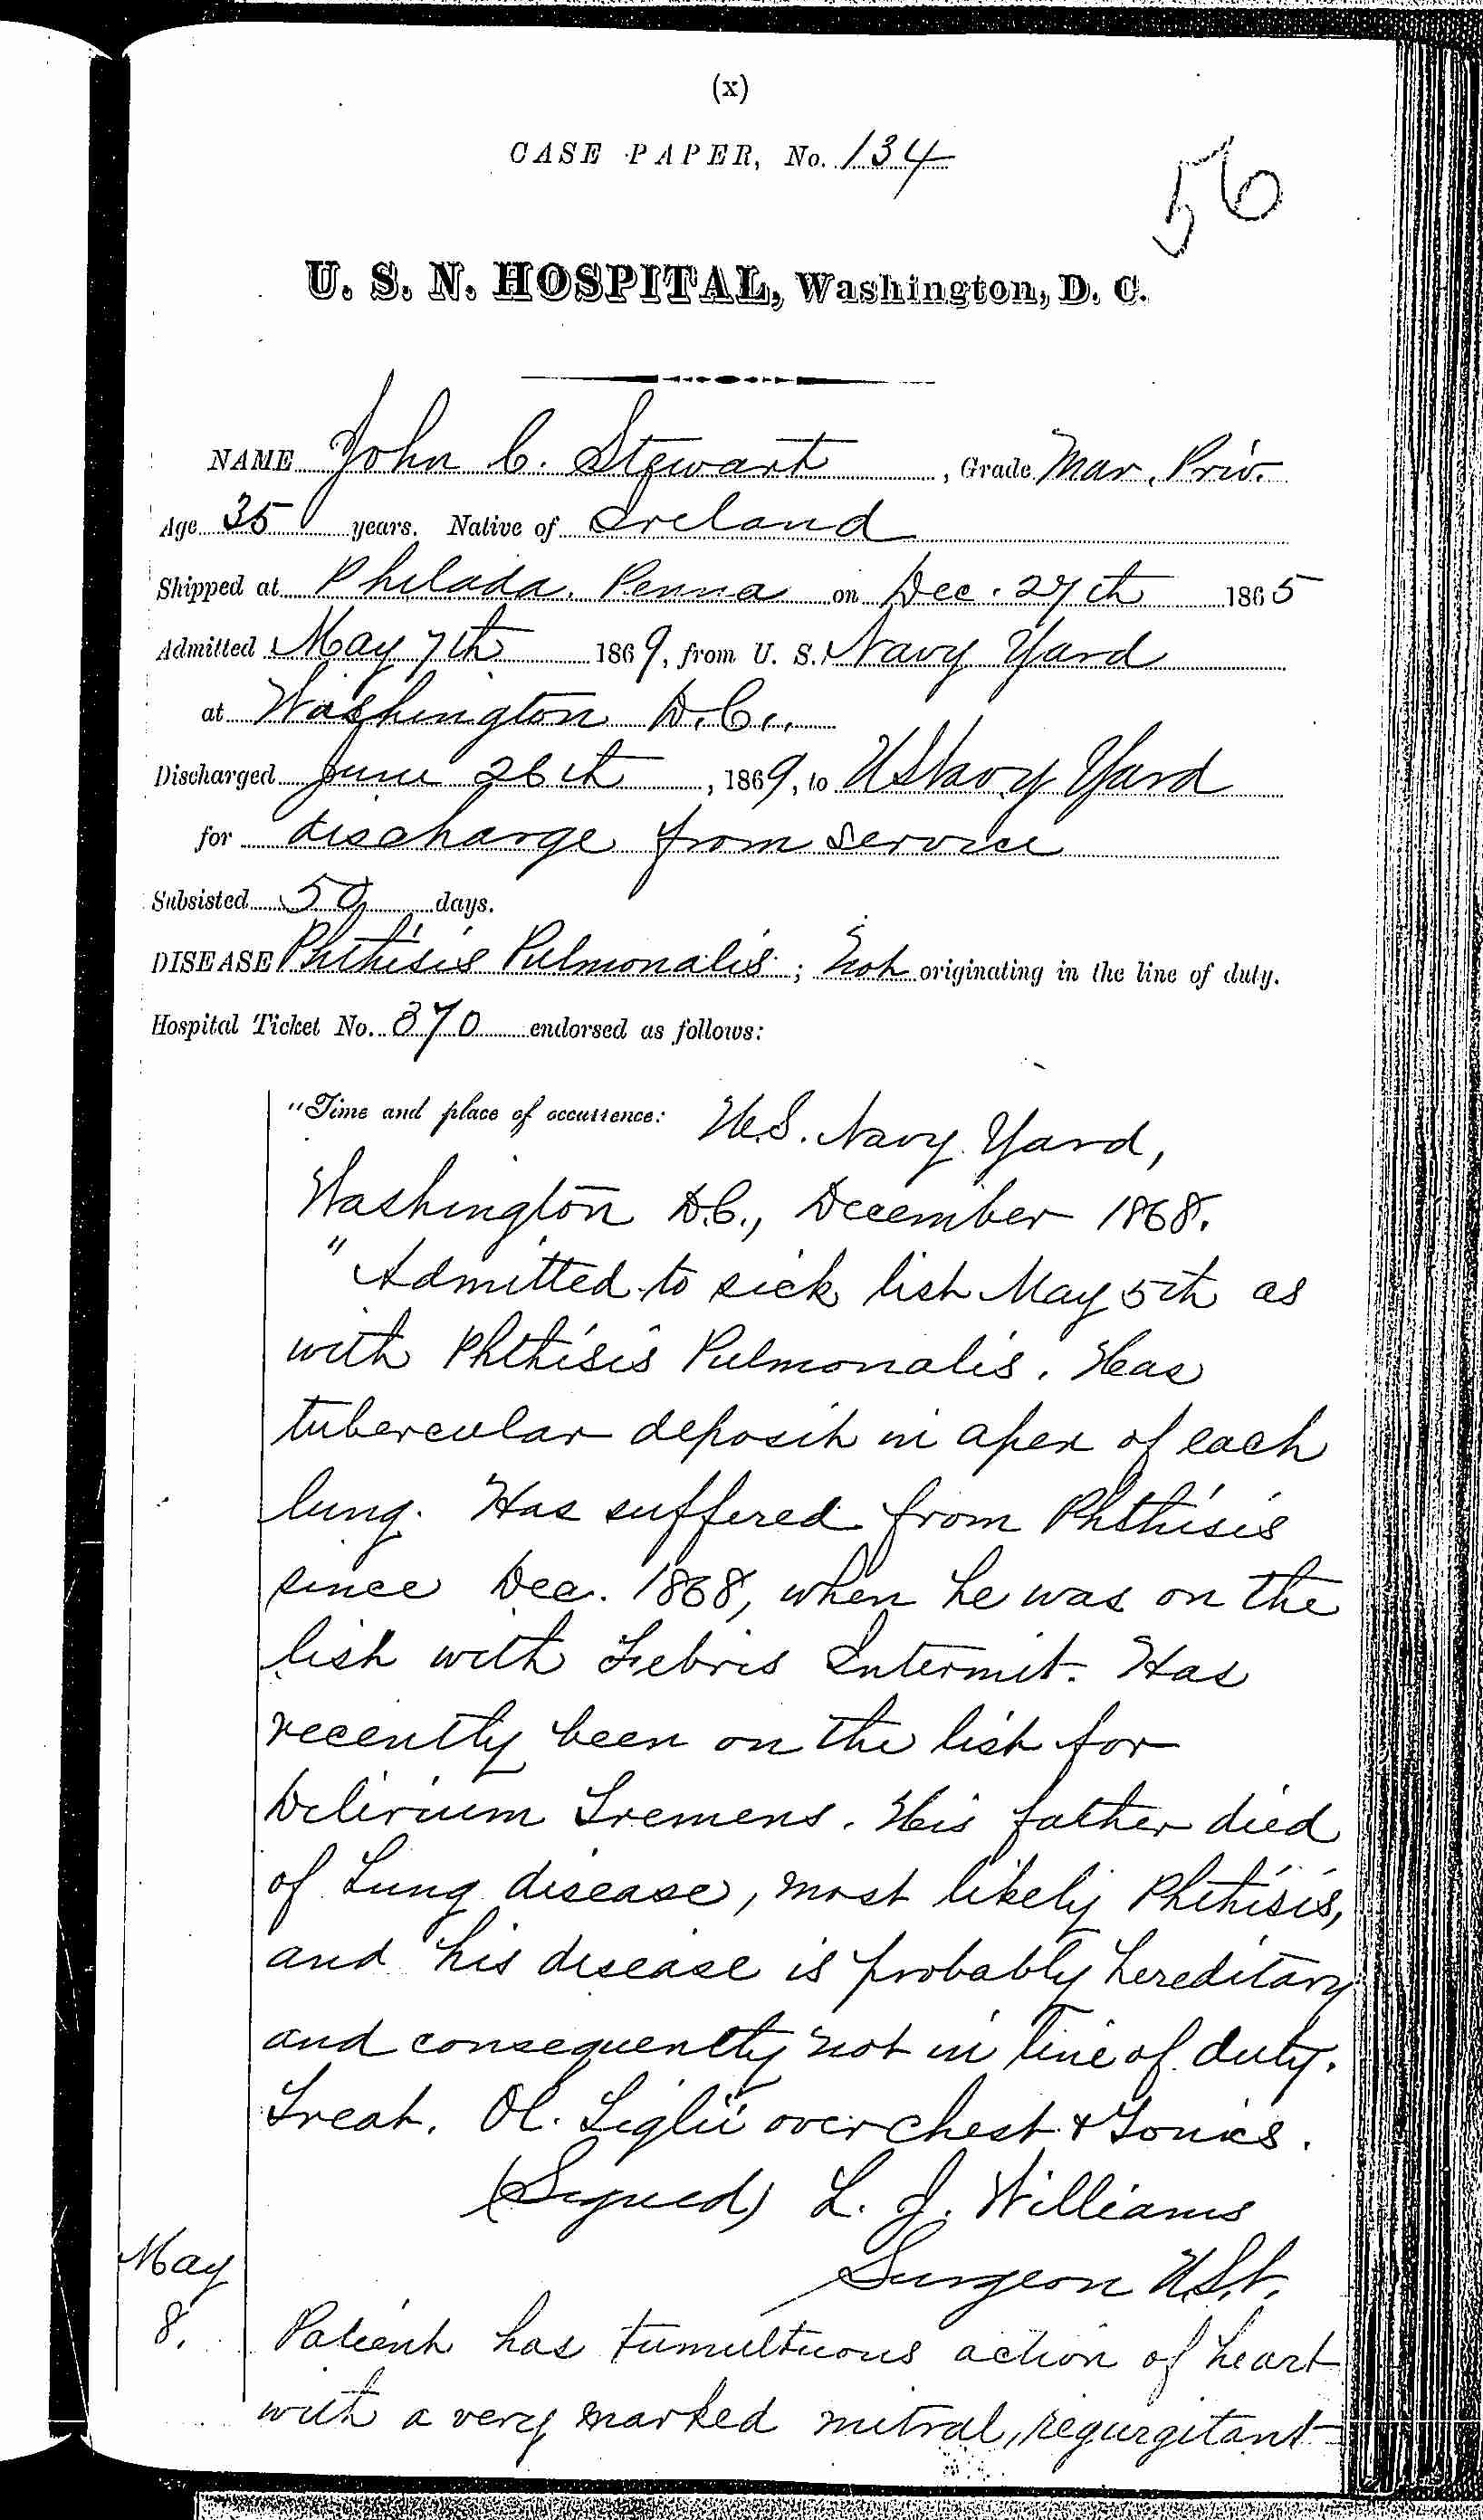 Entry for John G. Stewart (page 1 of 6) in the log Hospital Tickets and Case Papers - Naval Hospital - Washington, D.C. - 1868-69